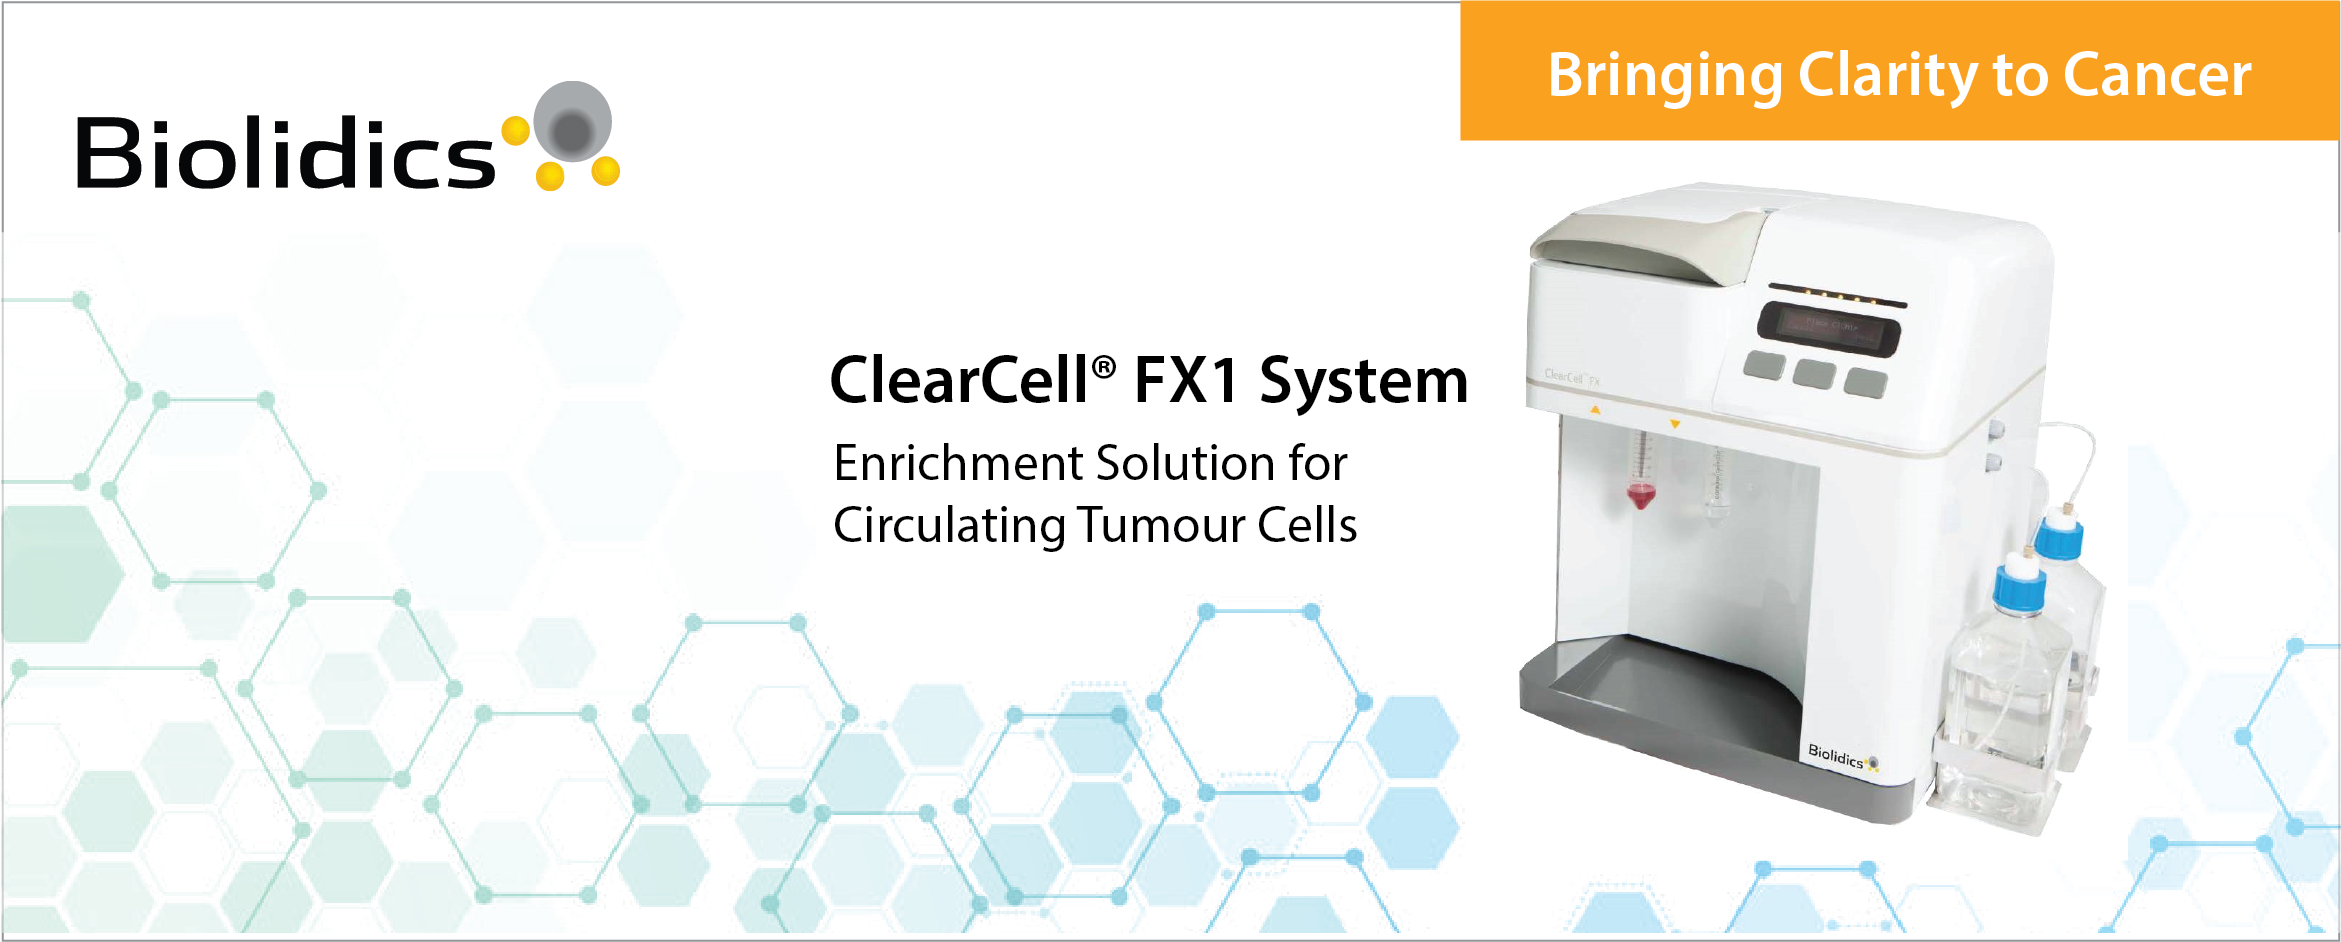 ClearCell FX1 System